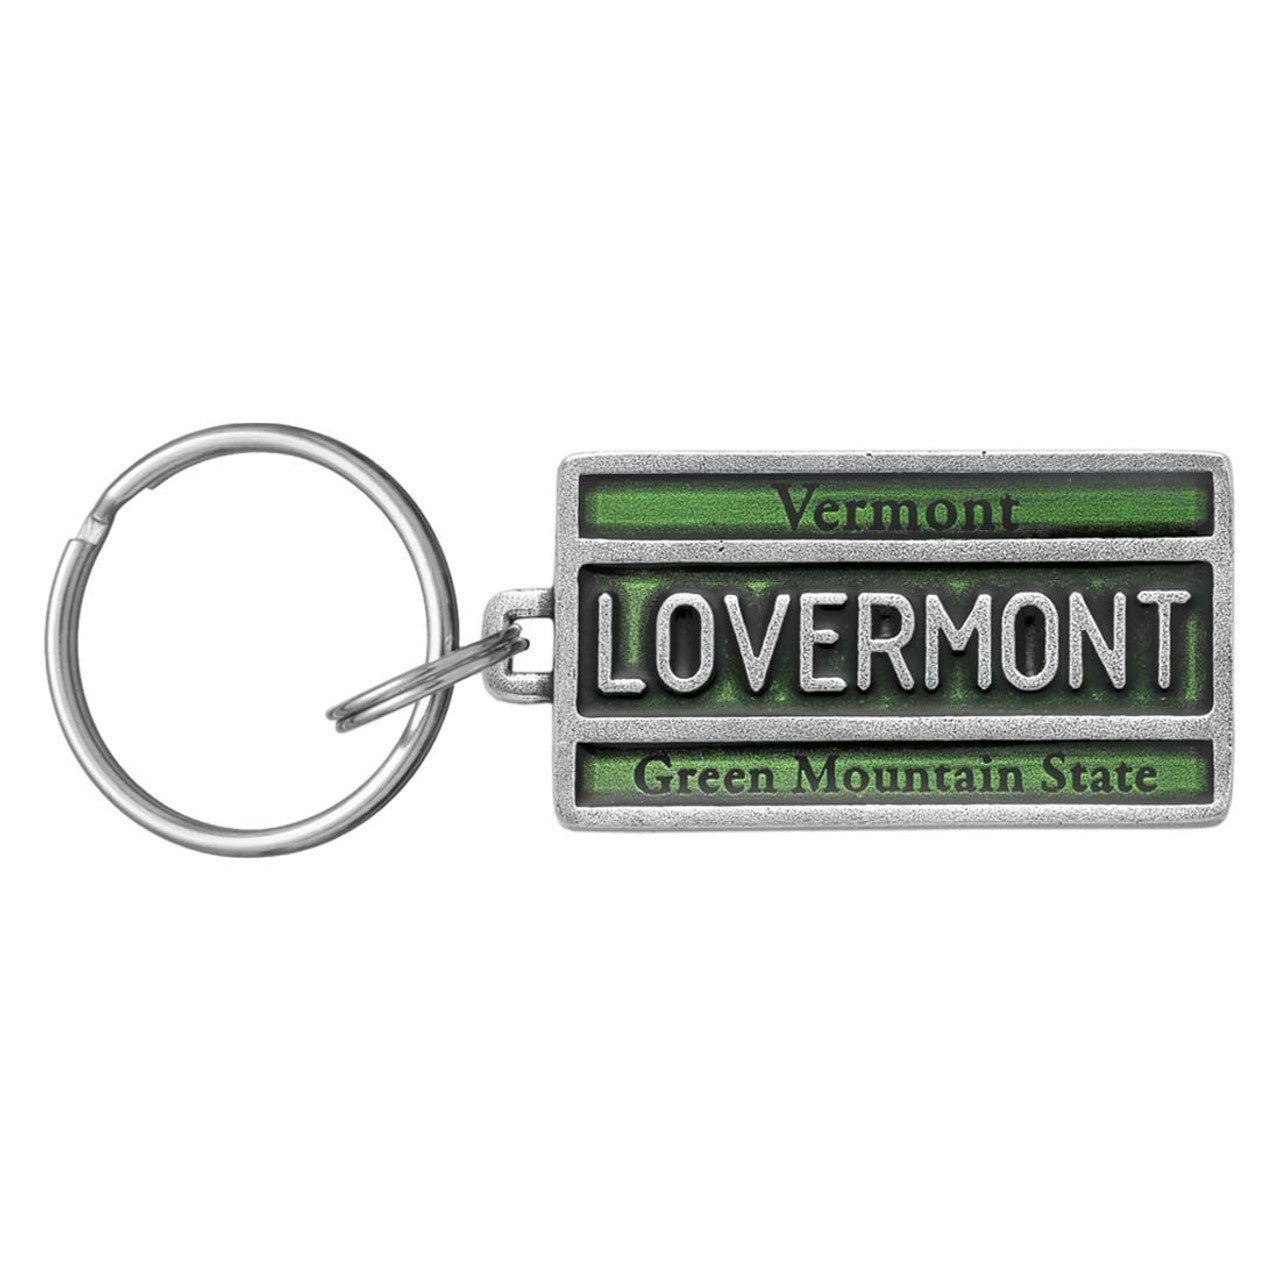 Danforth Pewter Vermont license plate keyring with LOVERMONT